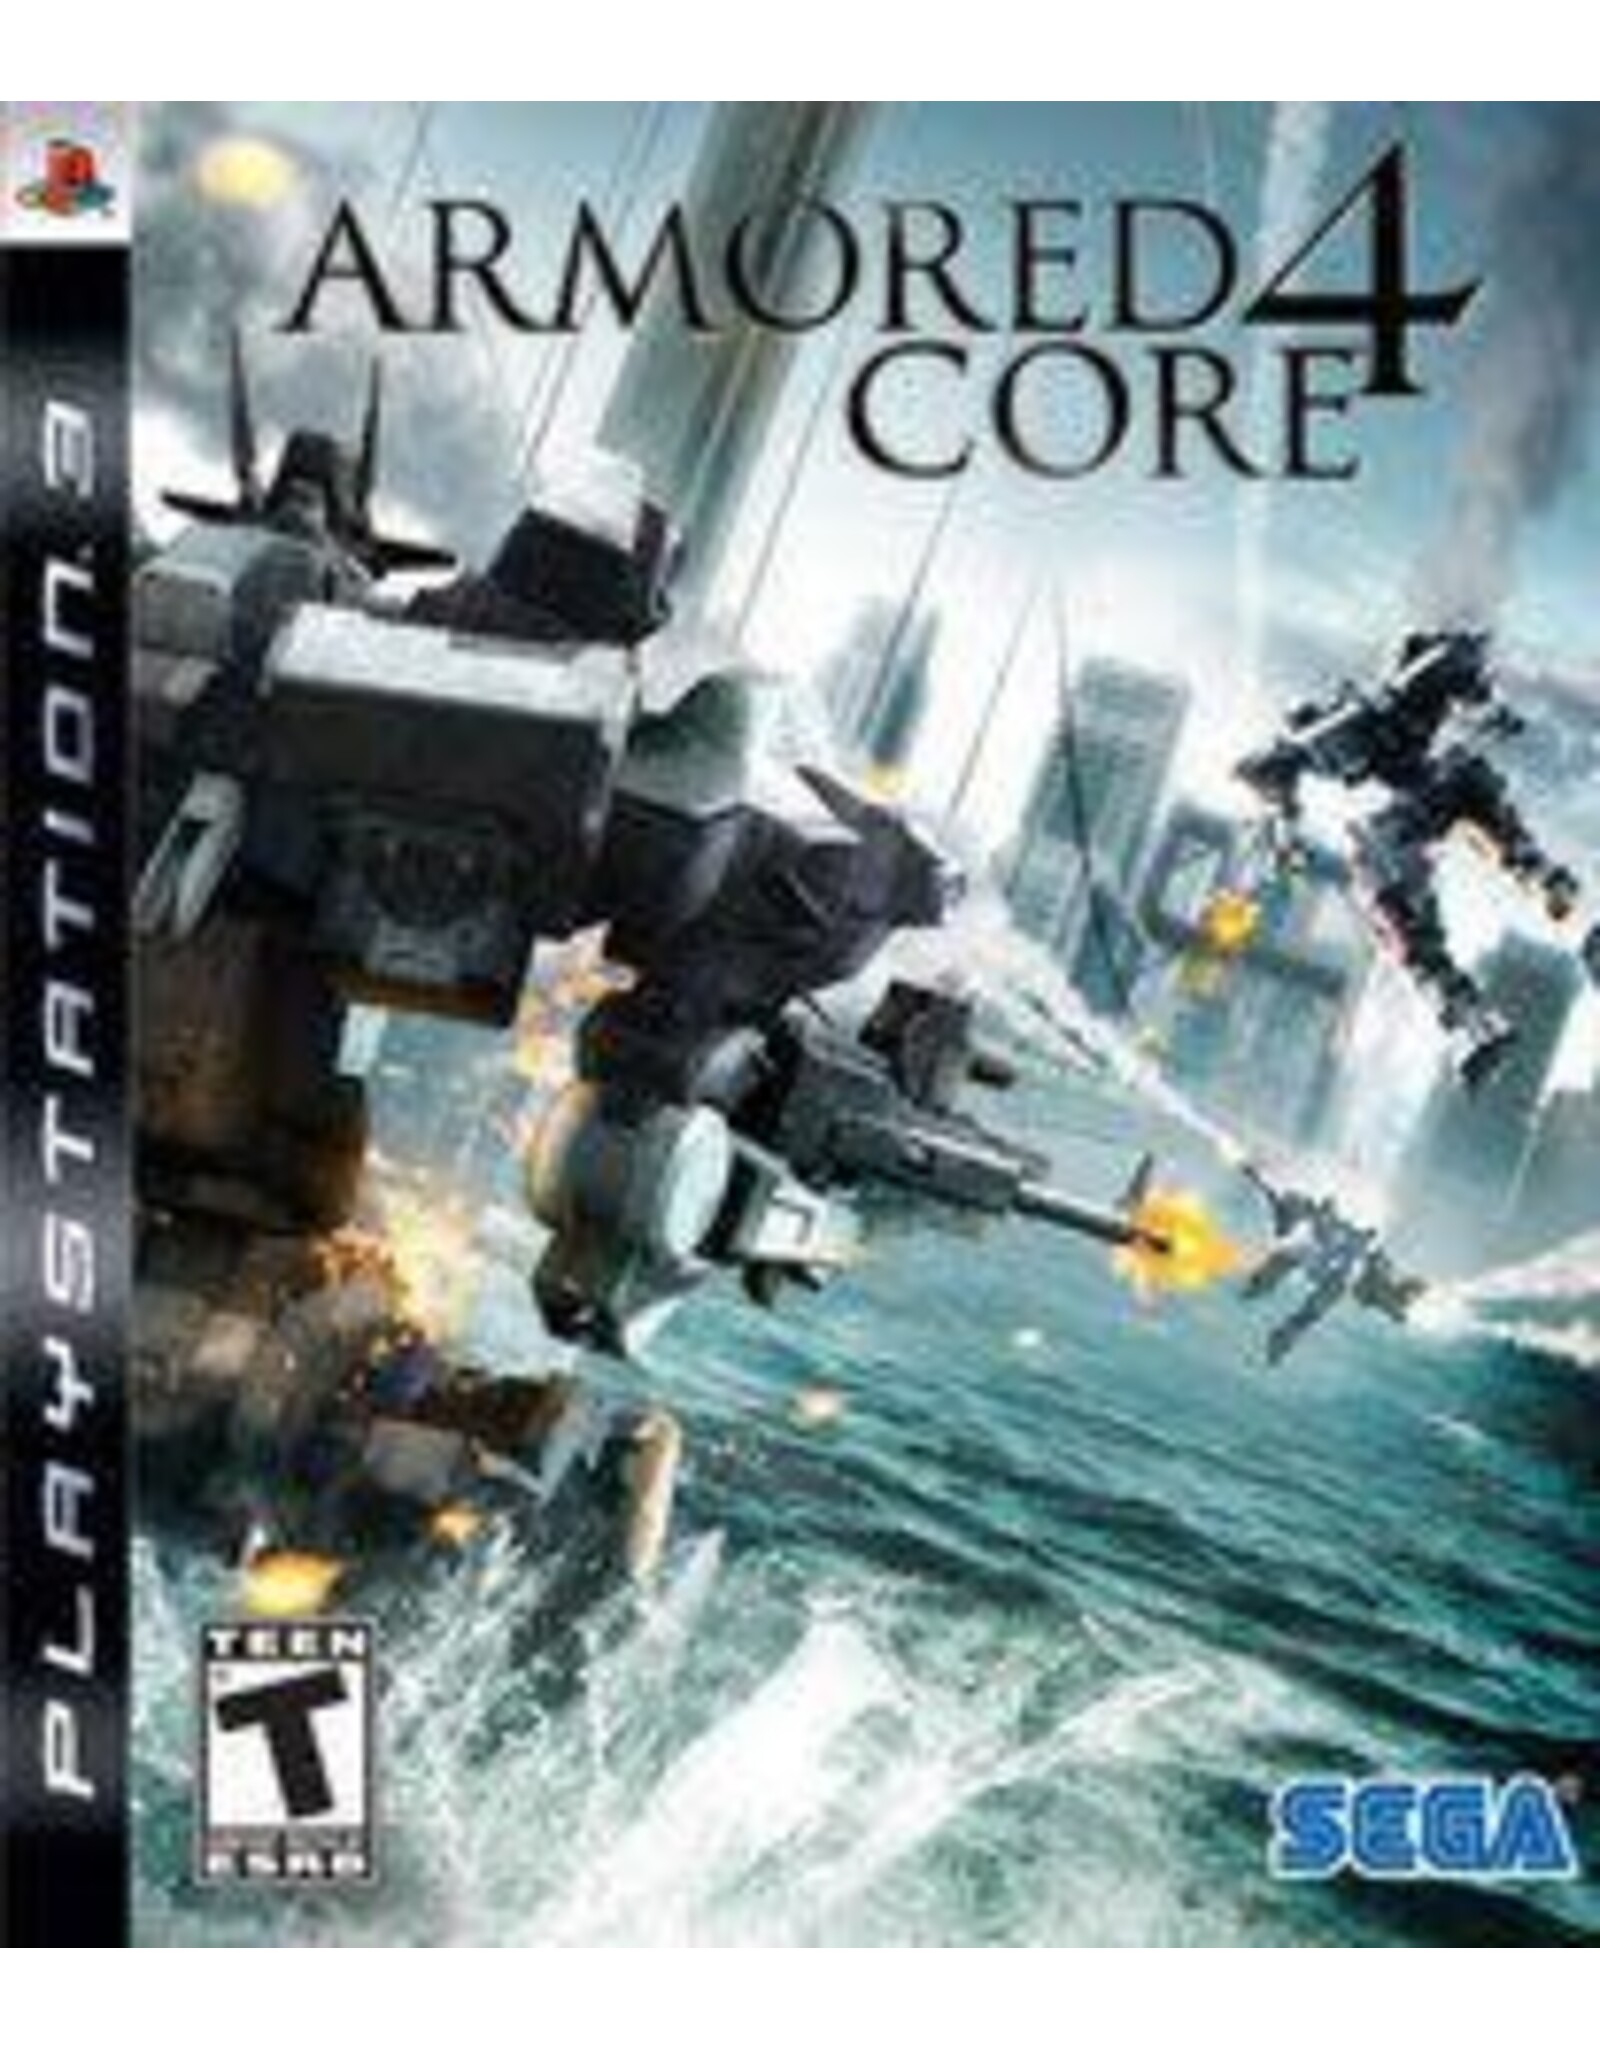 Playstation 3 Armored Core 4 (Used)